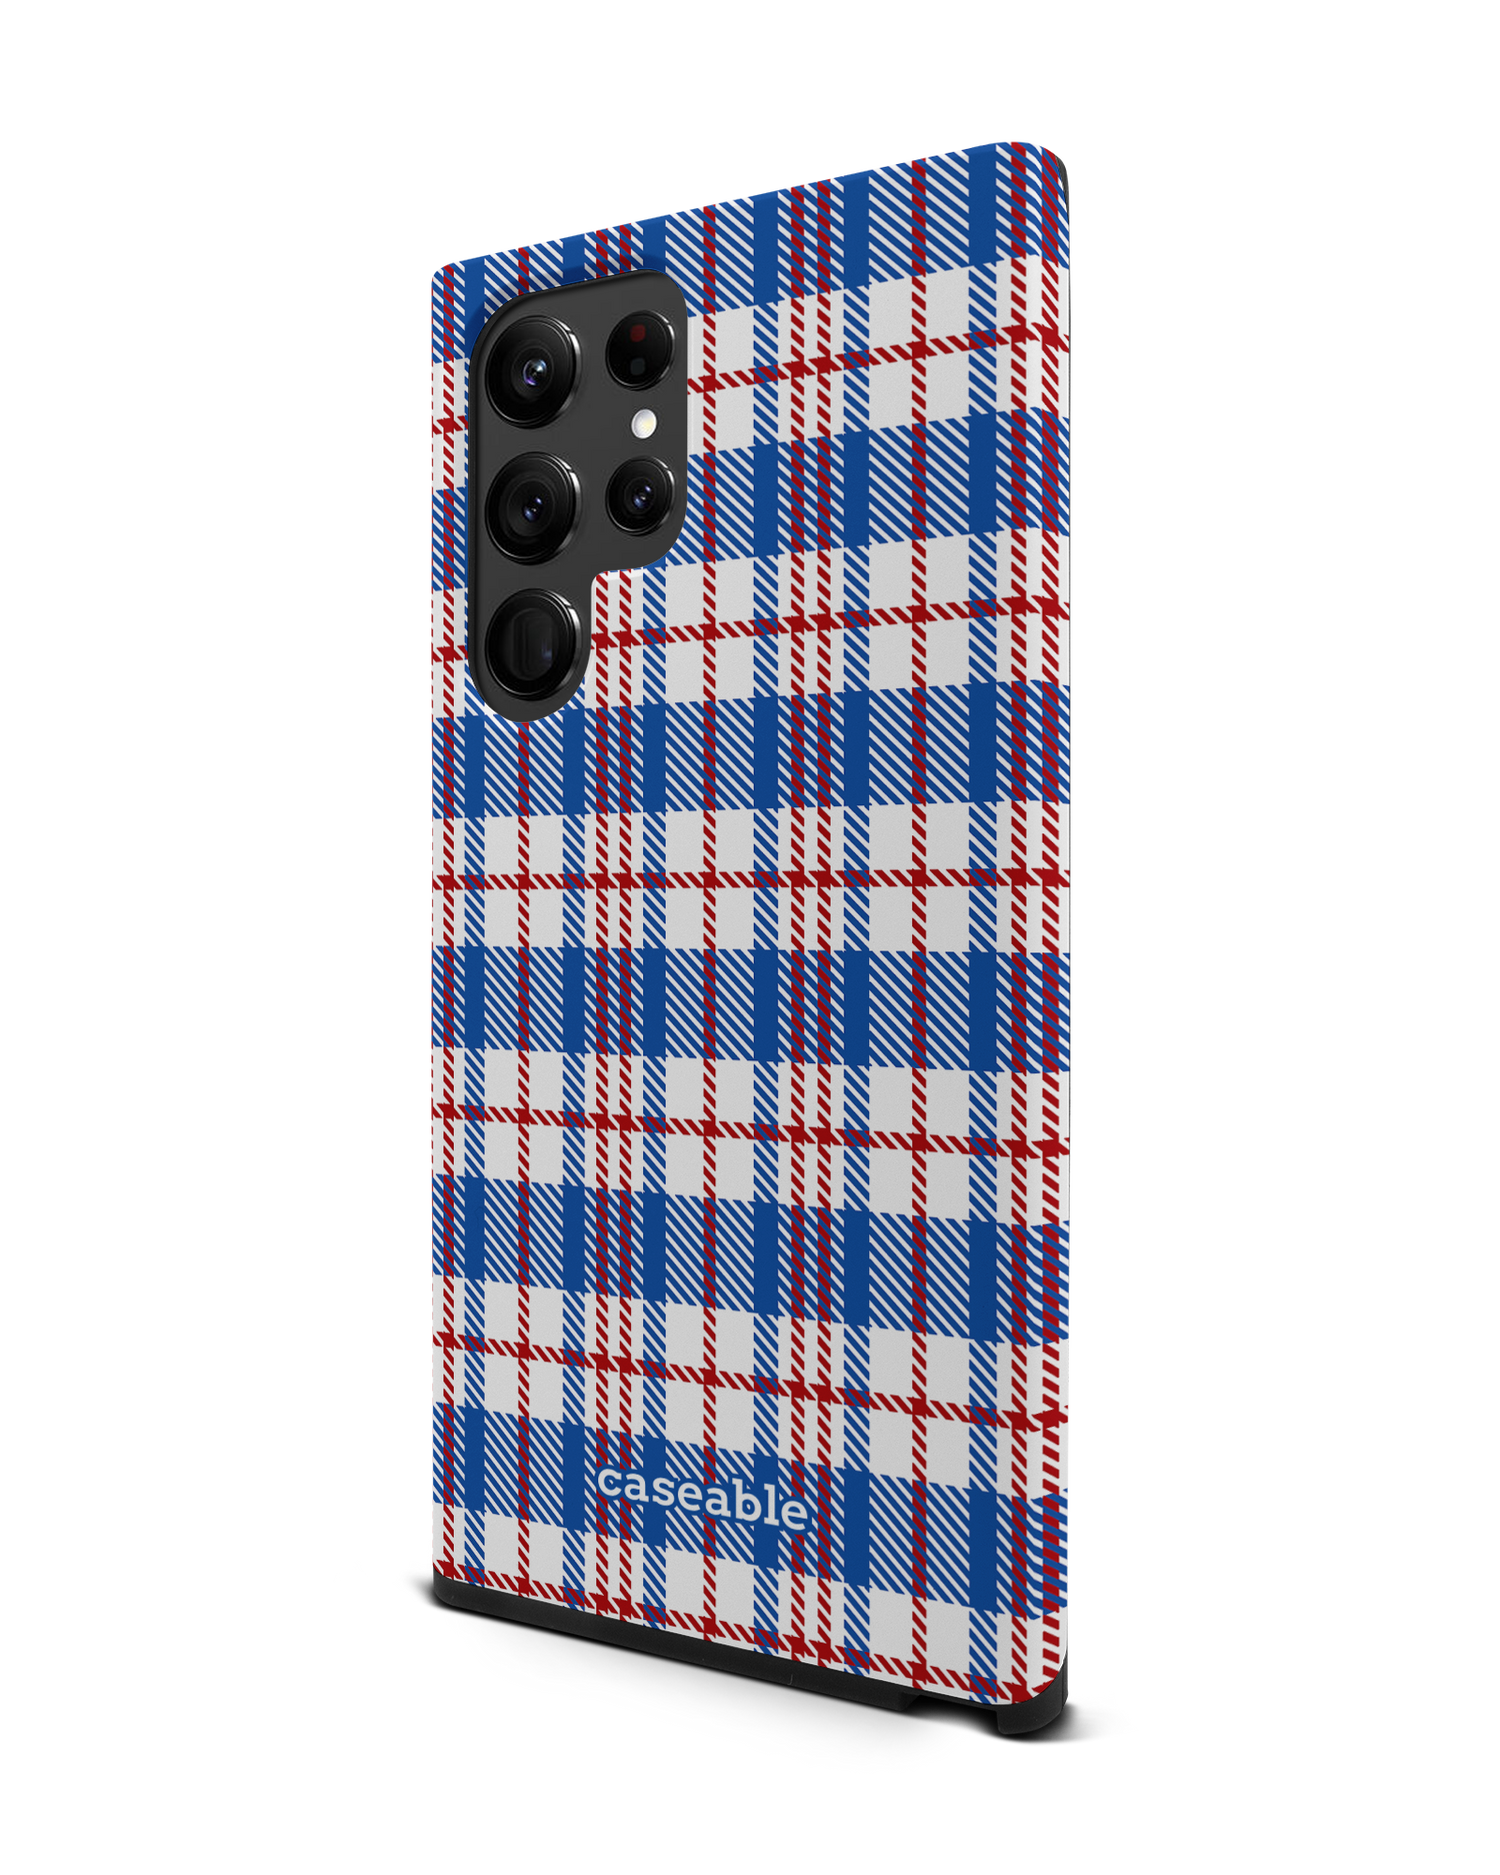 Plaid Market Bag Premium Phone Case Samsung Galaxy S22 Ultra 5G: View from the right side